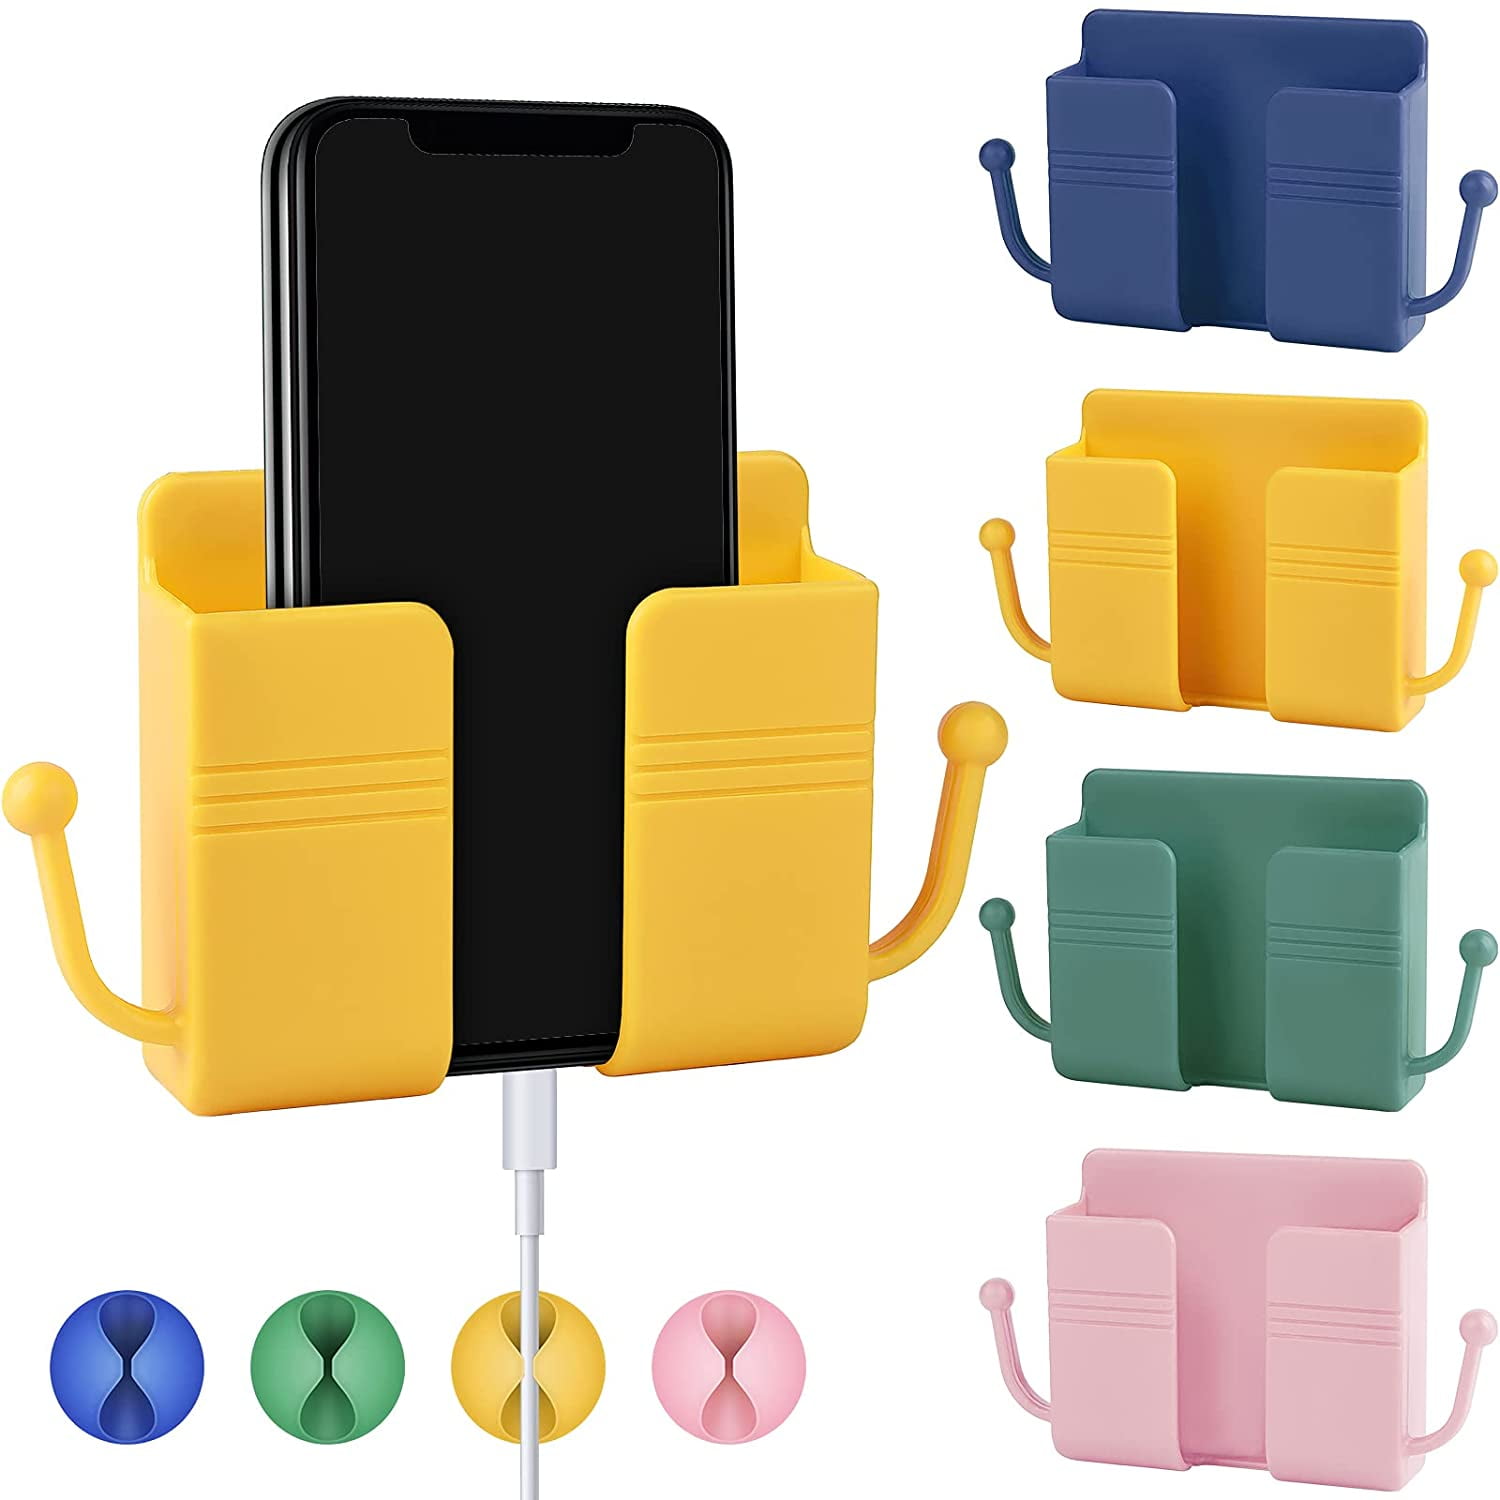 Rack Pairs Hanging Home Kitchen Remote Plastic Wall Hooks Hanger Holder 